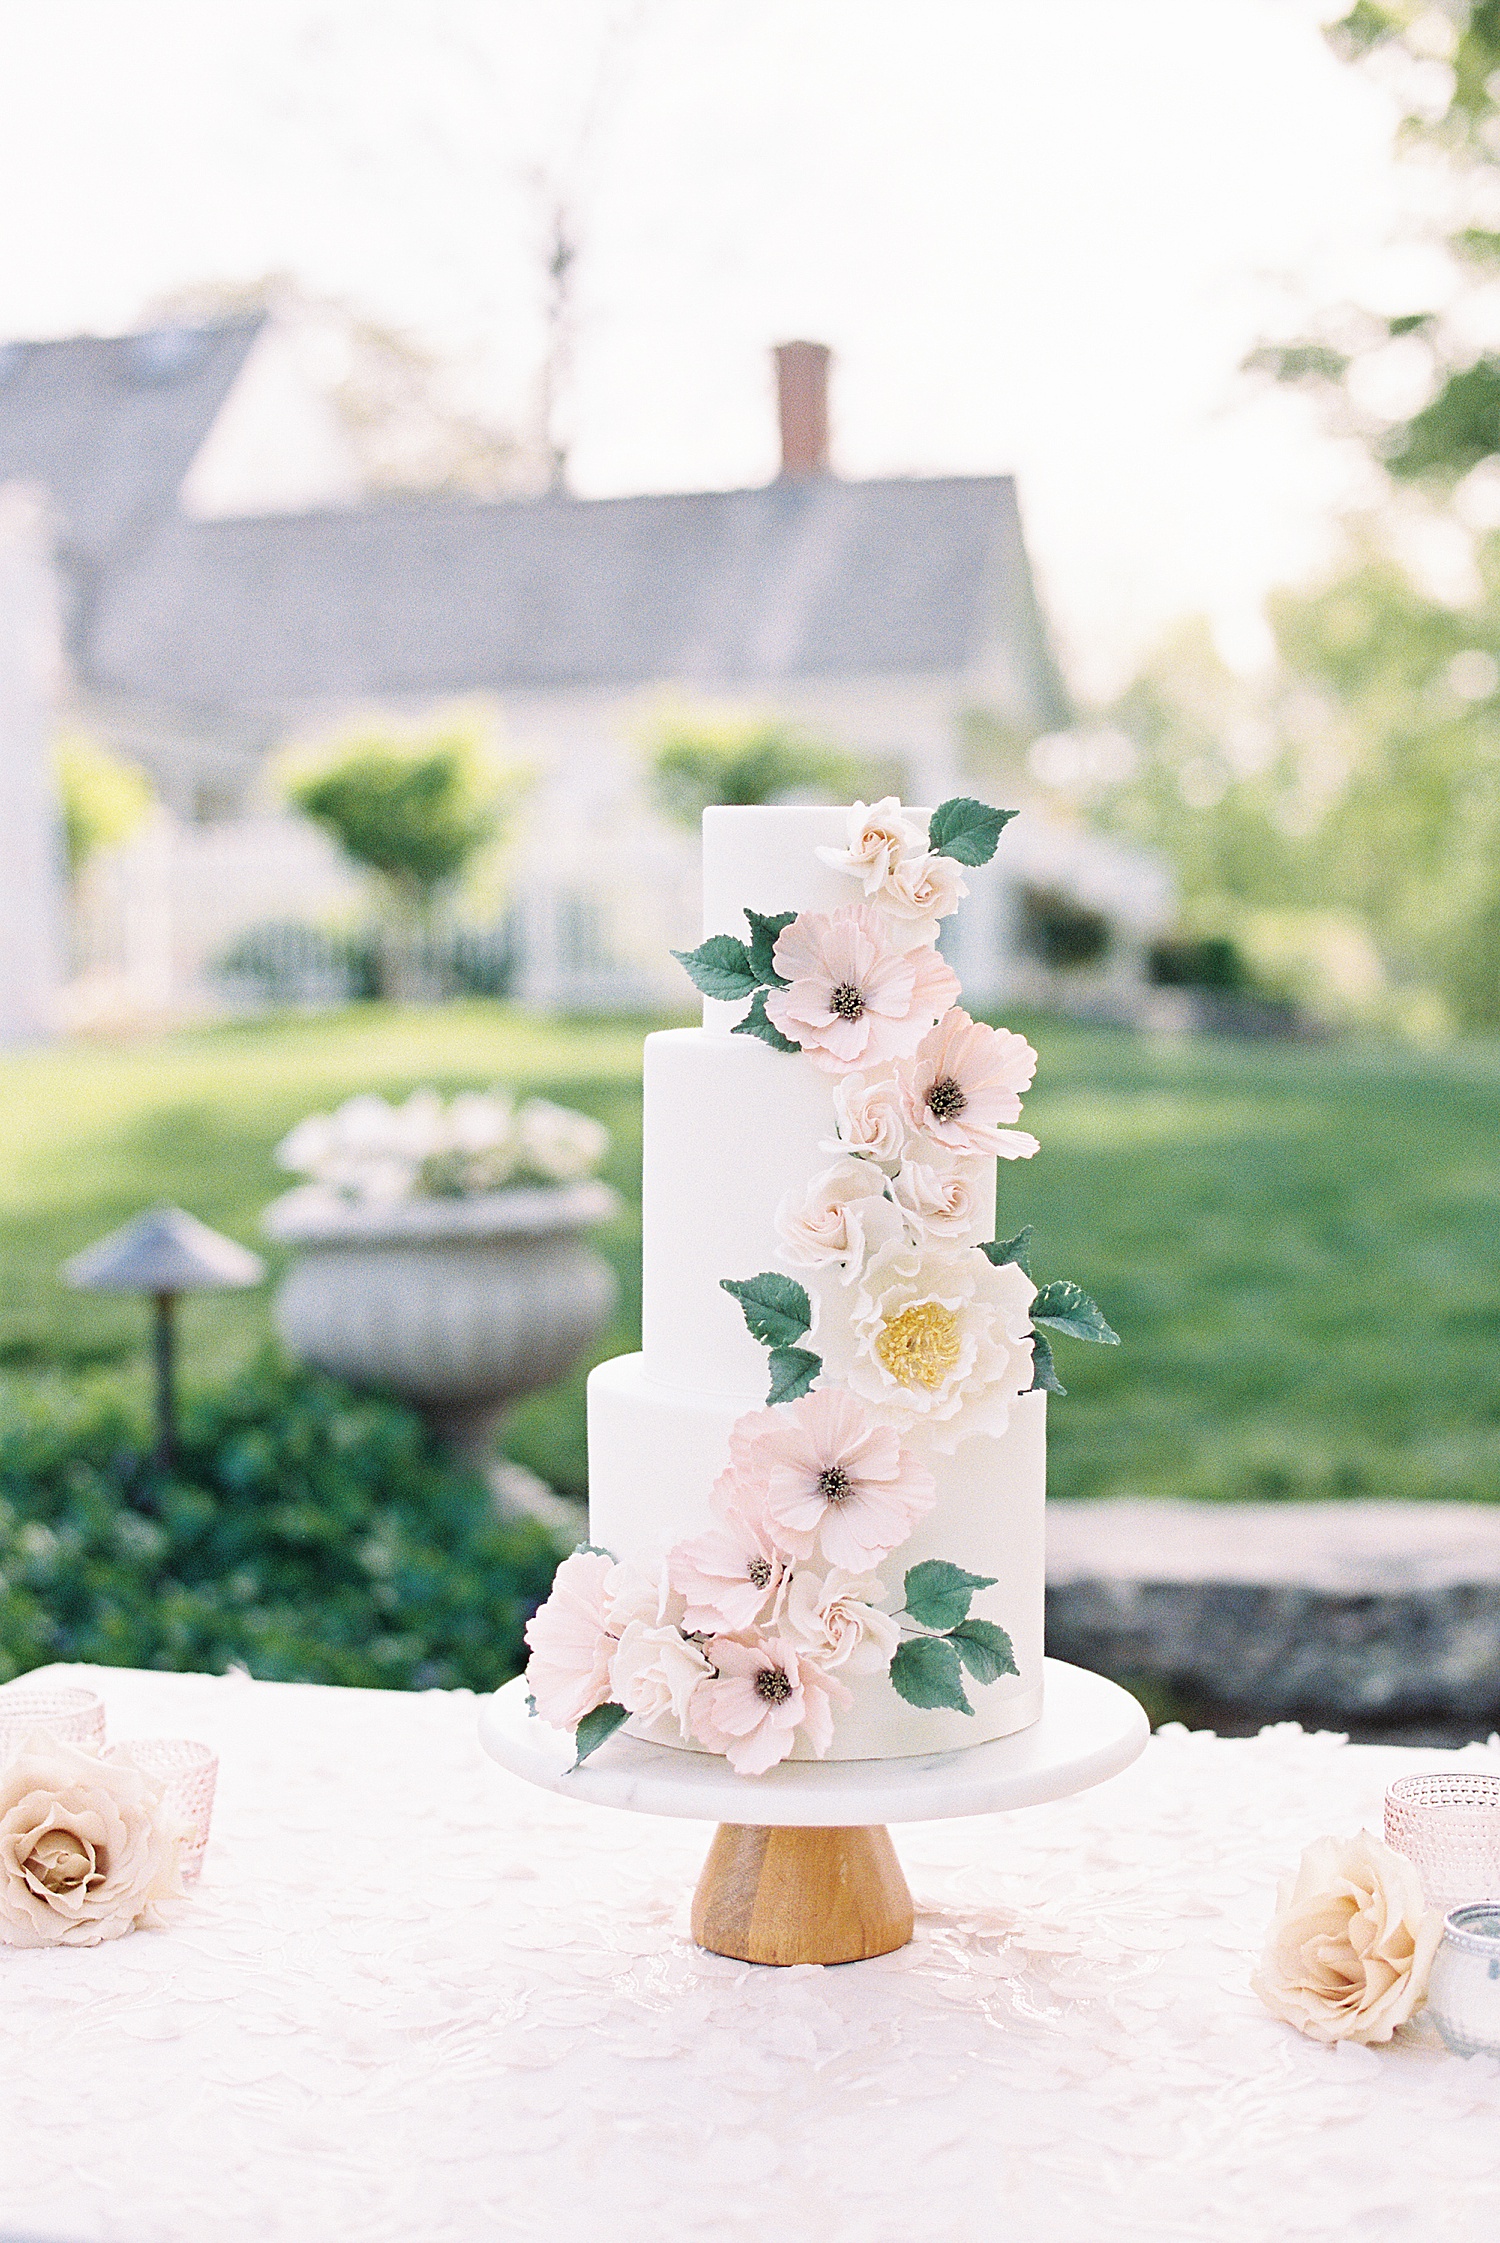 Three tiered cake with flowers for dat at Smith Farm Gardens